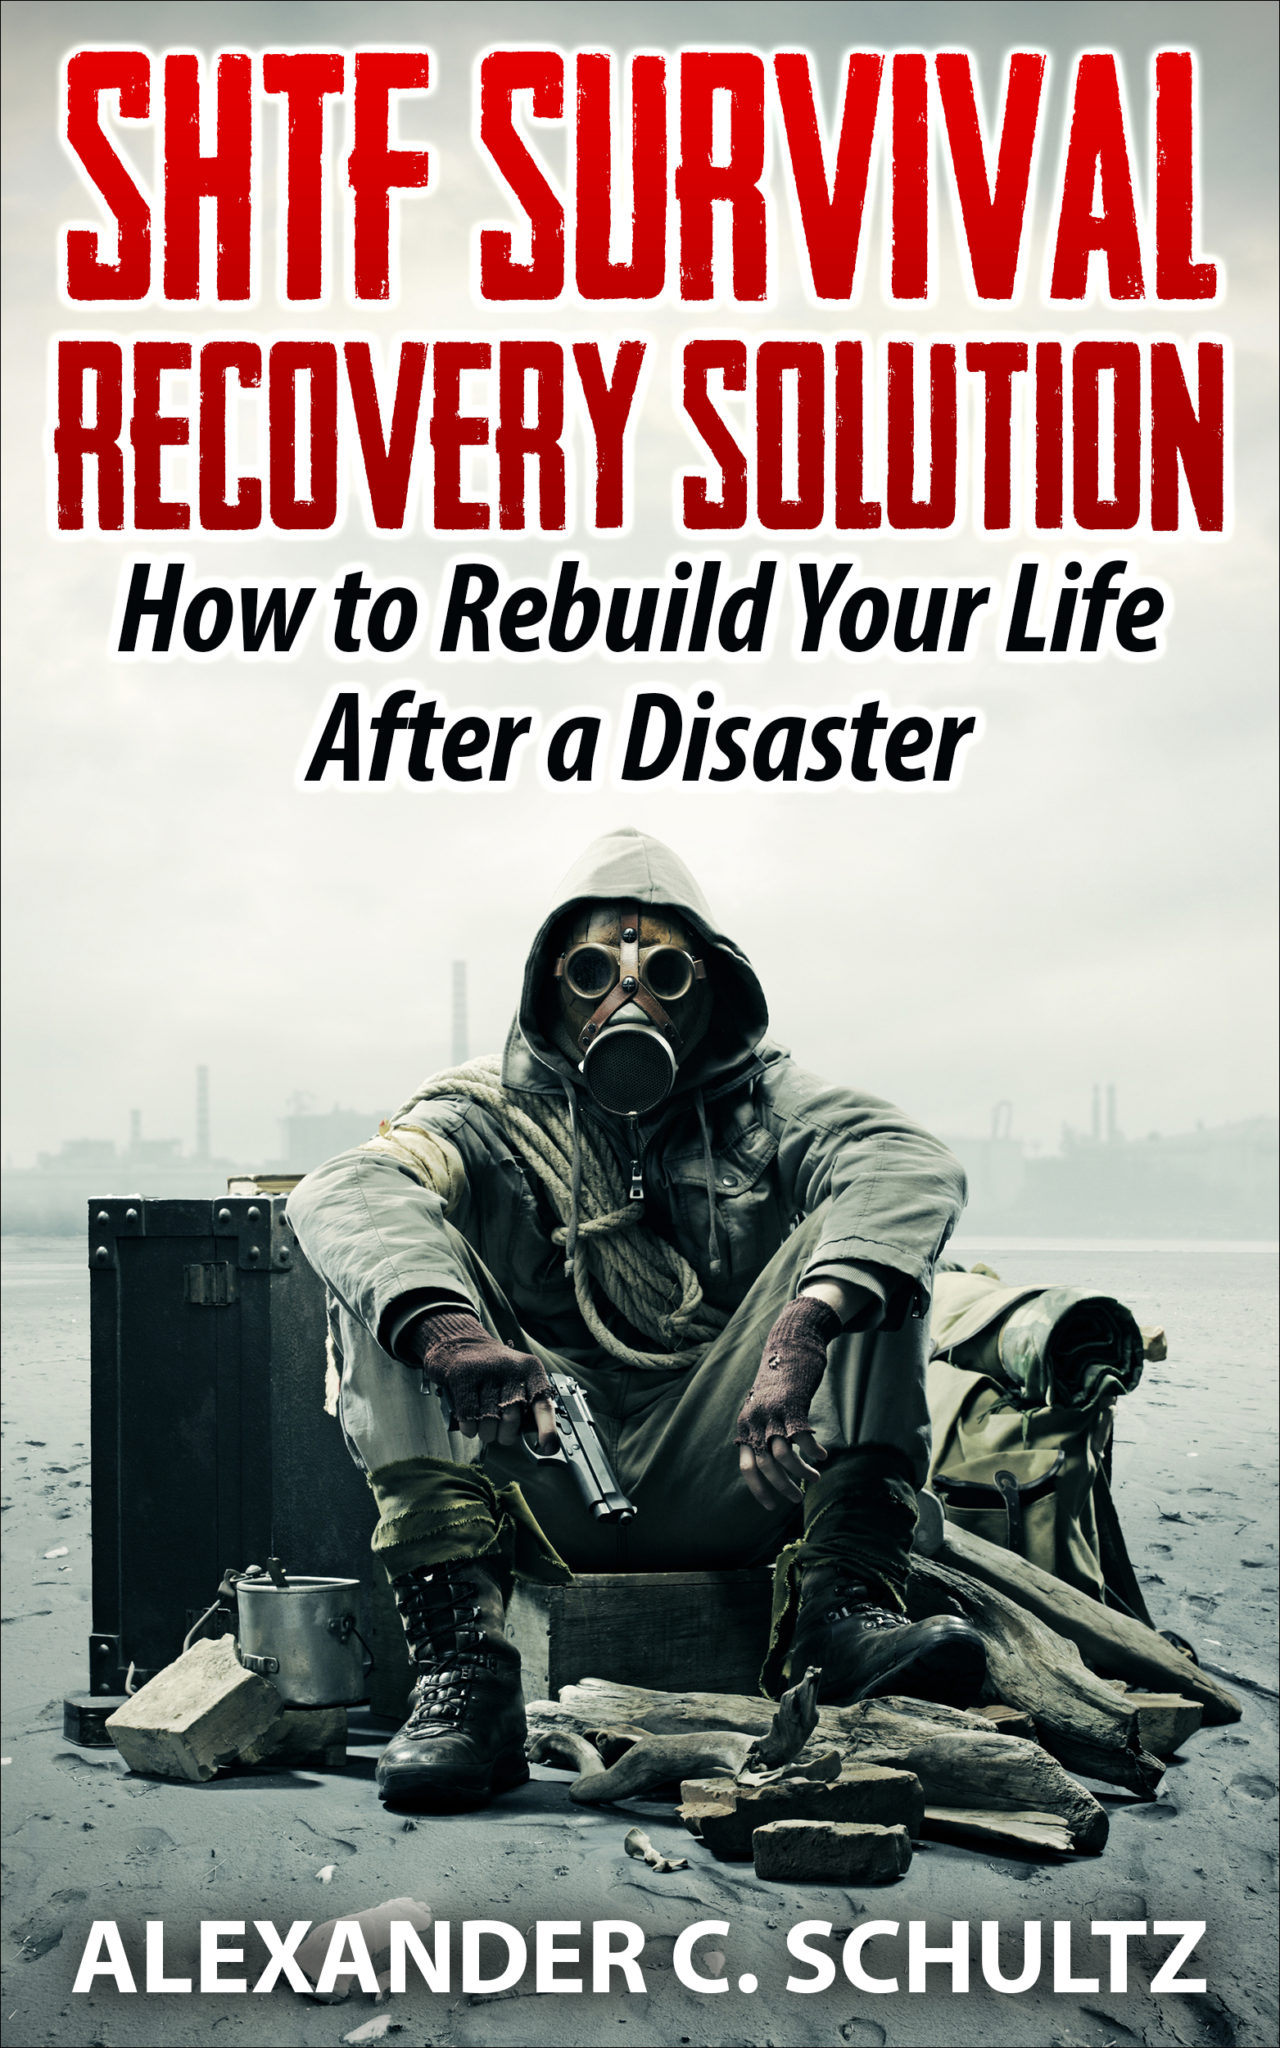 FREE: SHTF Survival Recovery Solution: How to Rebuild Your Life After a Disaster by Alexander C. Schultz